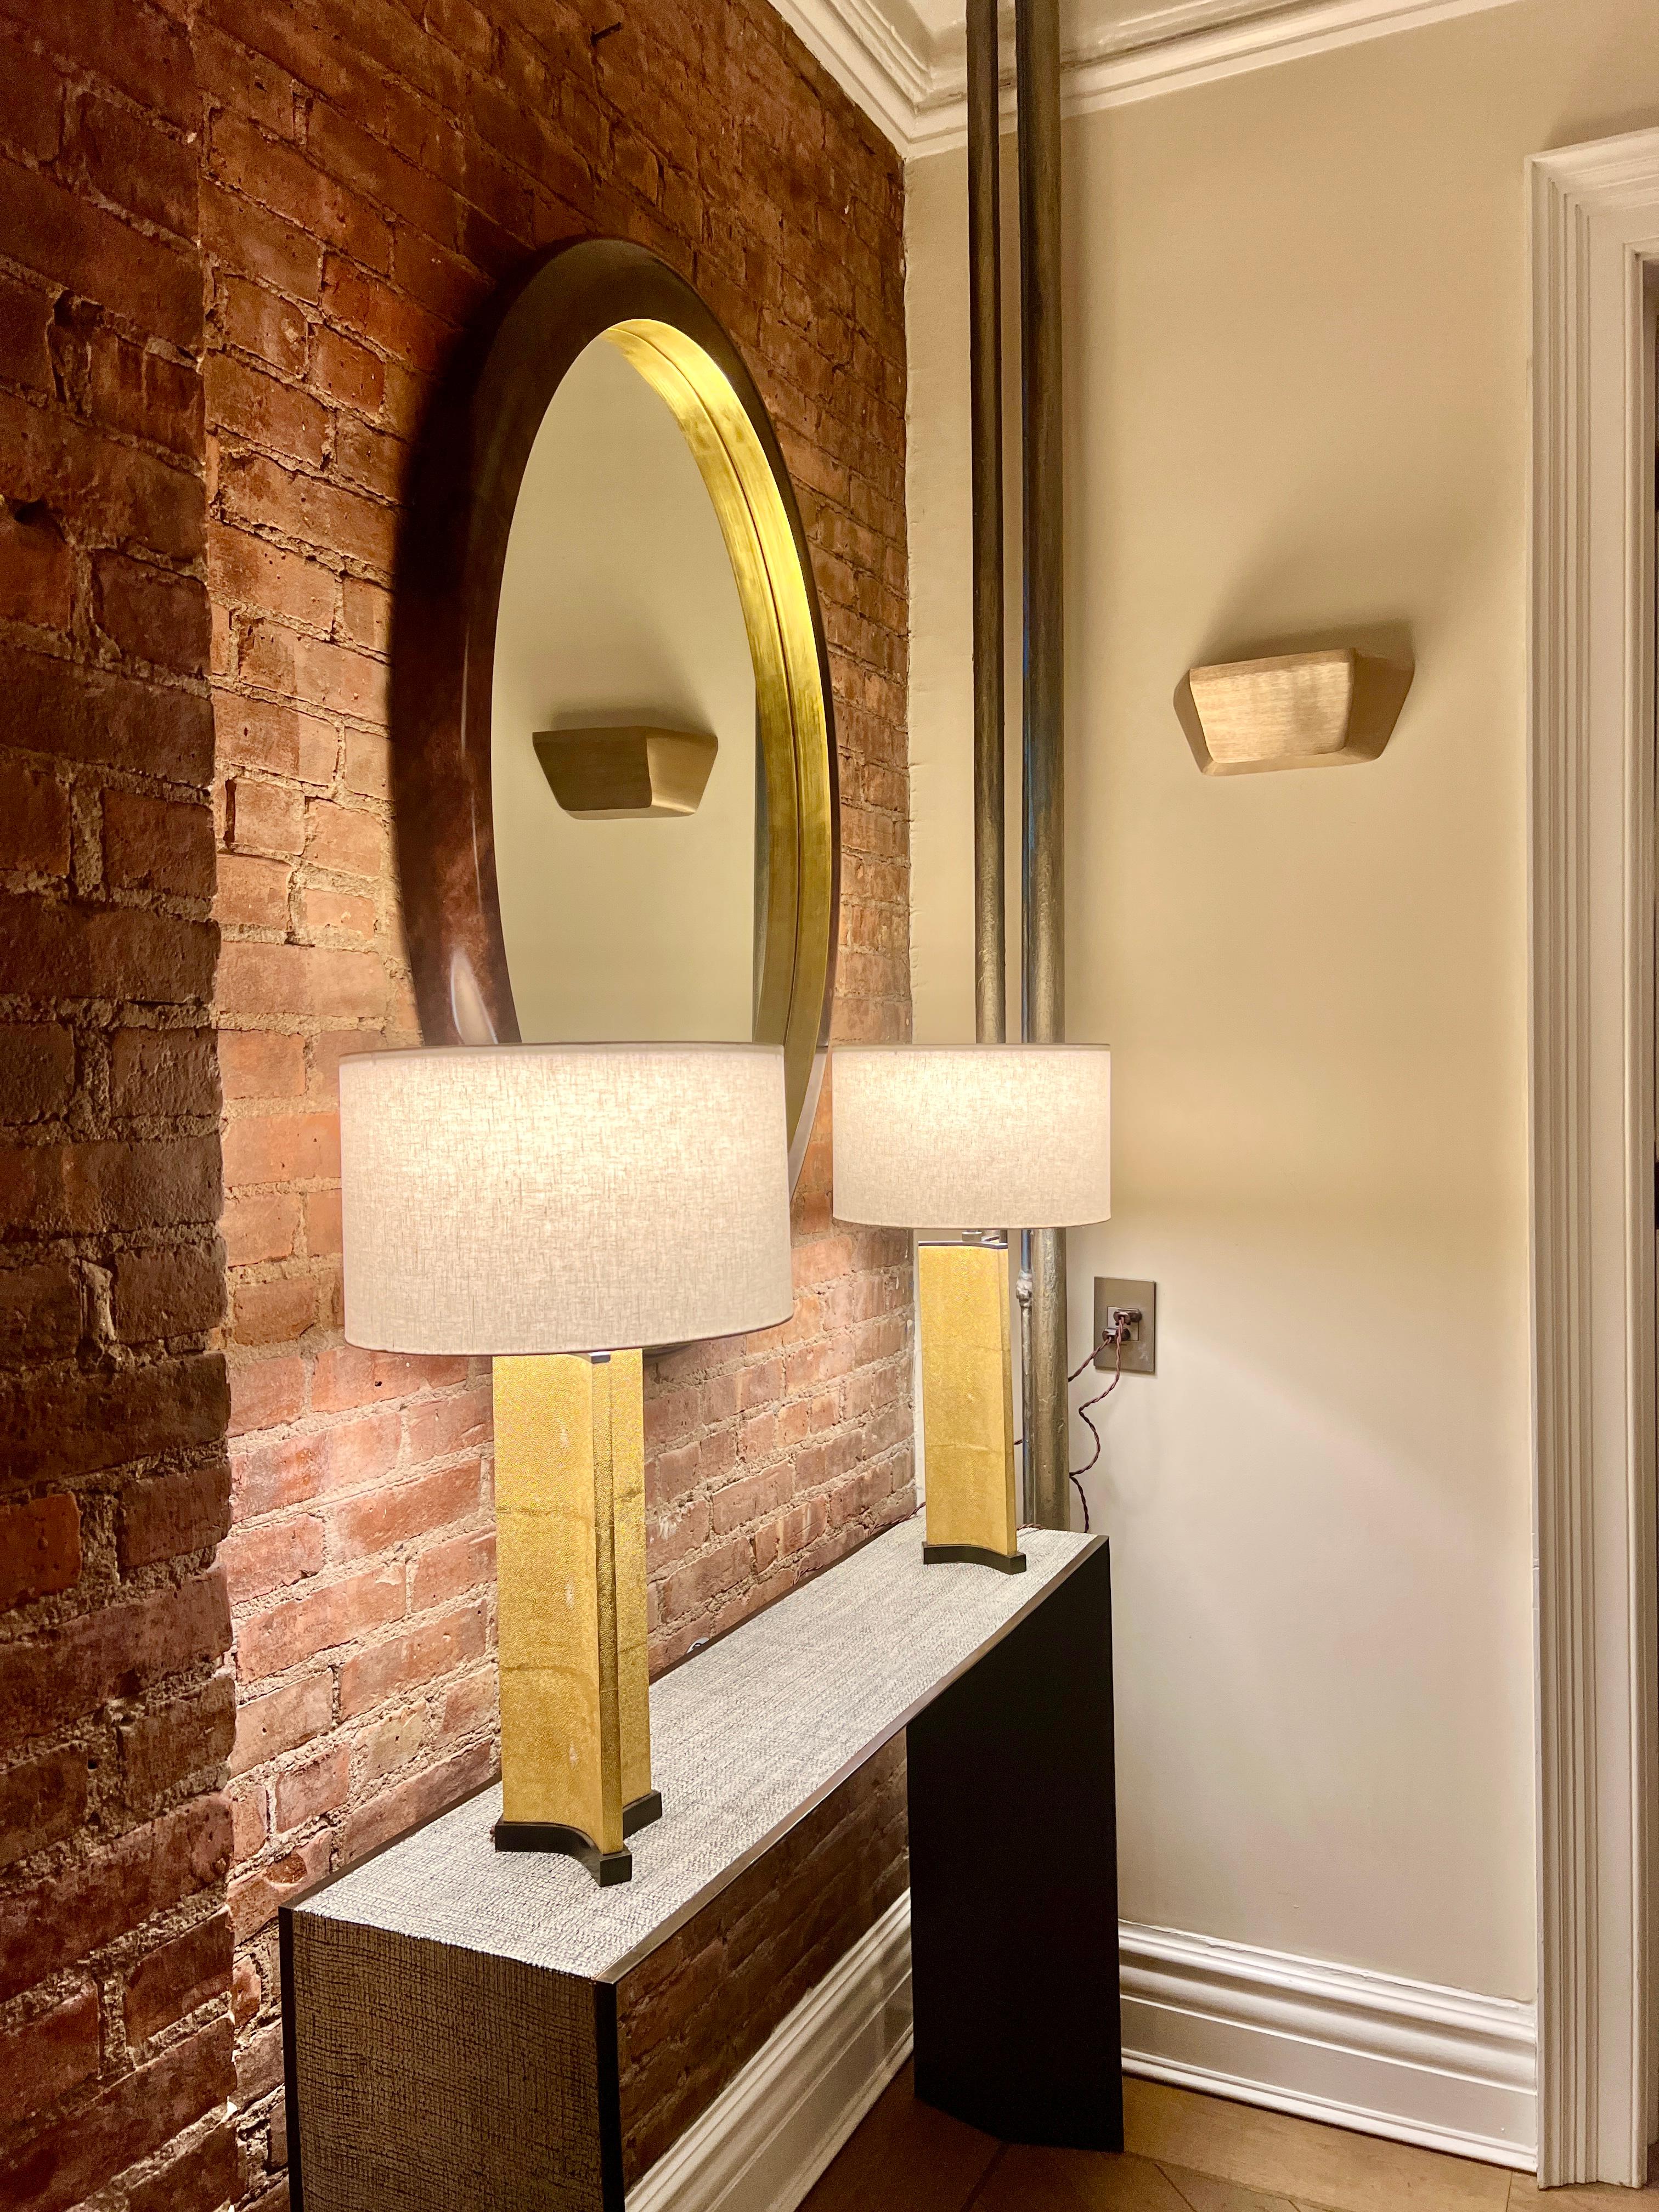 Available now and ready to ship! On display at the Manhattan showroom of Elan Atelier.

Large, sculptural, Bruno lamp covered in real shagreen with a sheer gold leaf overlay. White shade with diffuser.

Large size:
diameter 13.8 x height 25.4